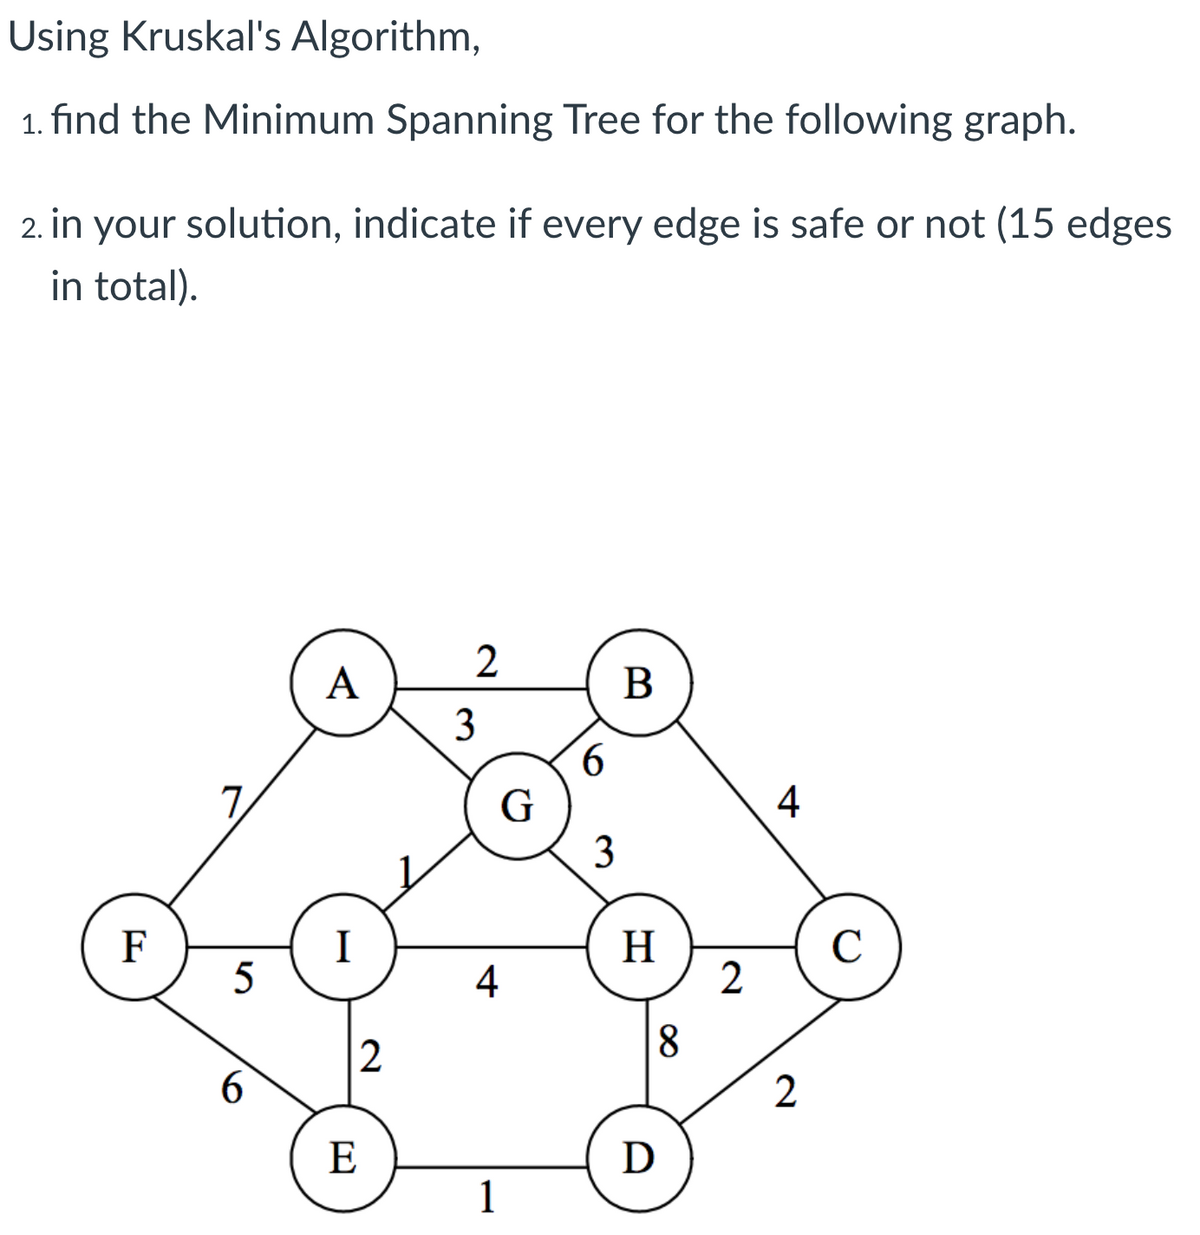 Using Kruskal's Algorithm,
1. find the Minimum Spanning Tree for the following graph.
2. in your solution, indicate if every edge is safe or not (15 edges
in total).
A
3
6.
G
3
7.
4
F
5
I
H
2
C
4
2
8
6.
2
E
D
1
